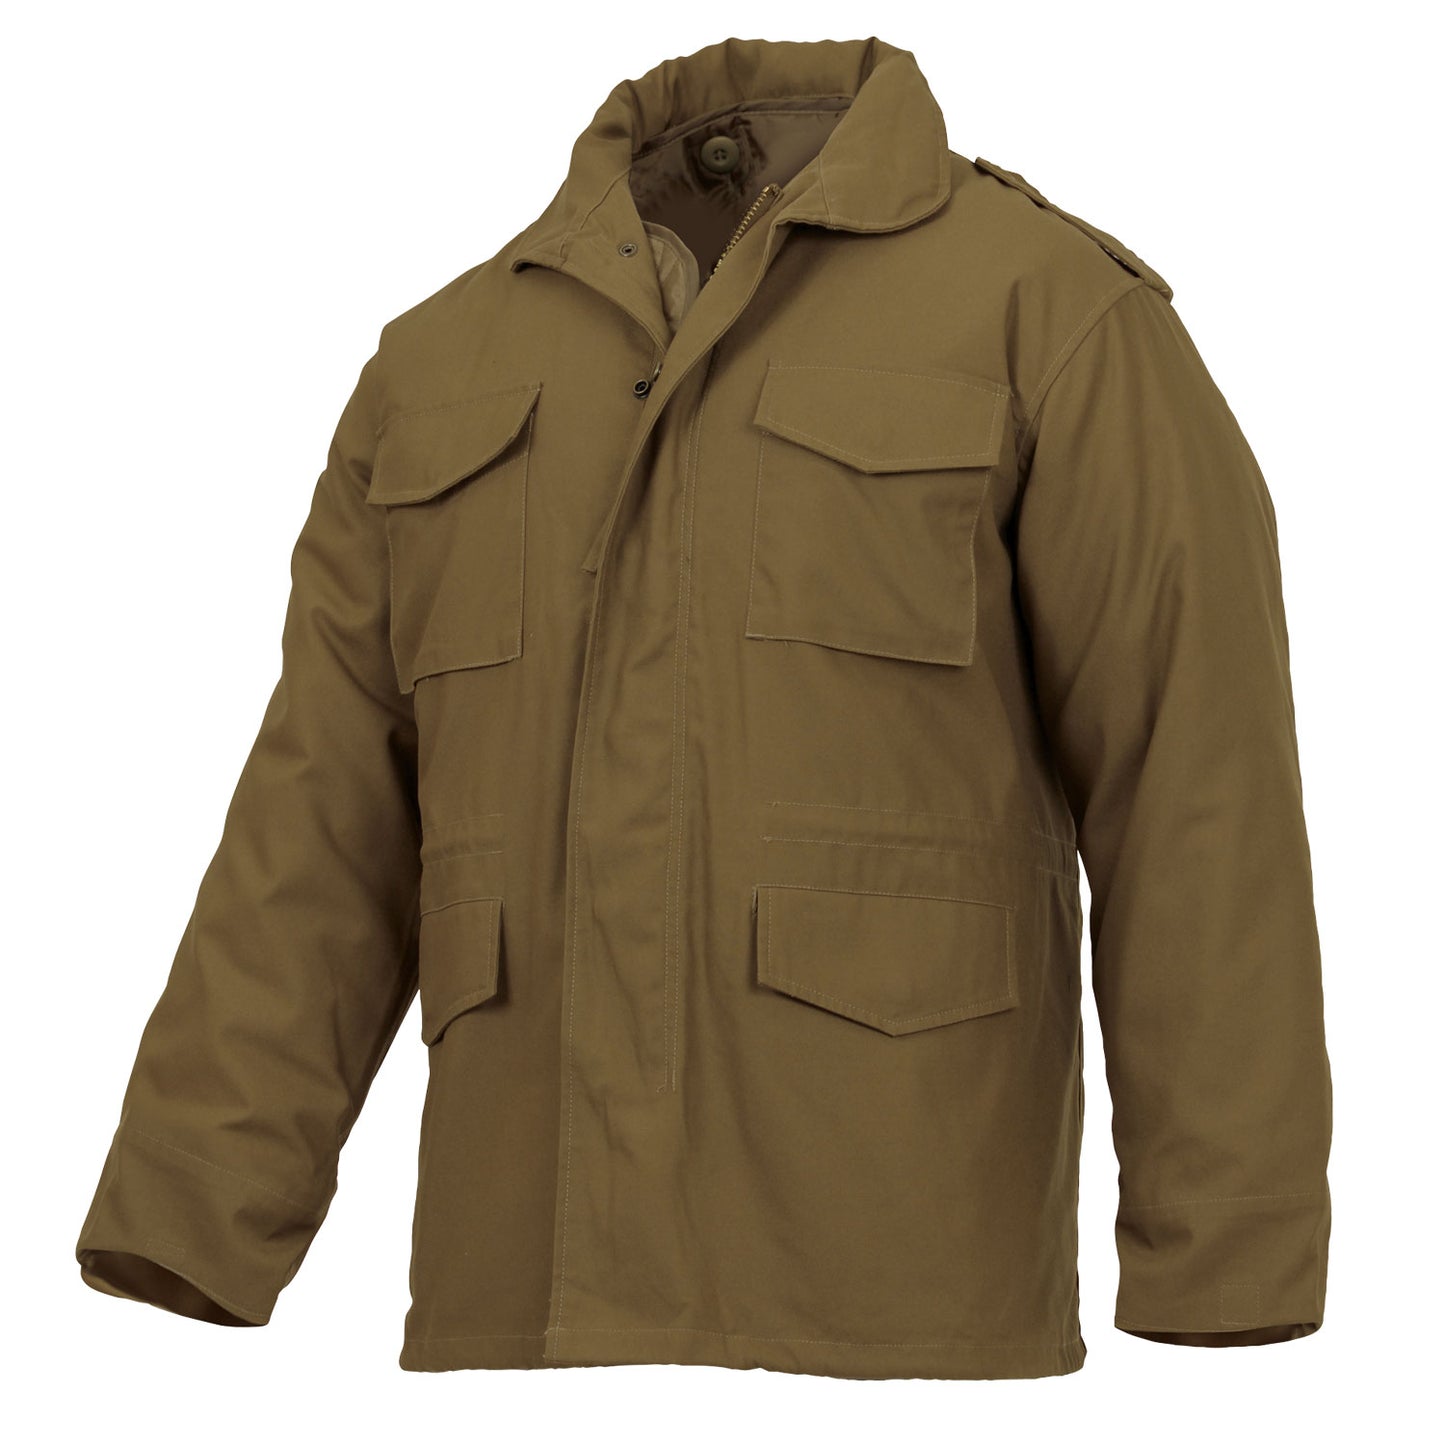 Milspec M-65 Field Jacket Gifts For Him MilTac Tactical Military Outdoor Gear Australia